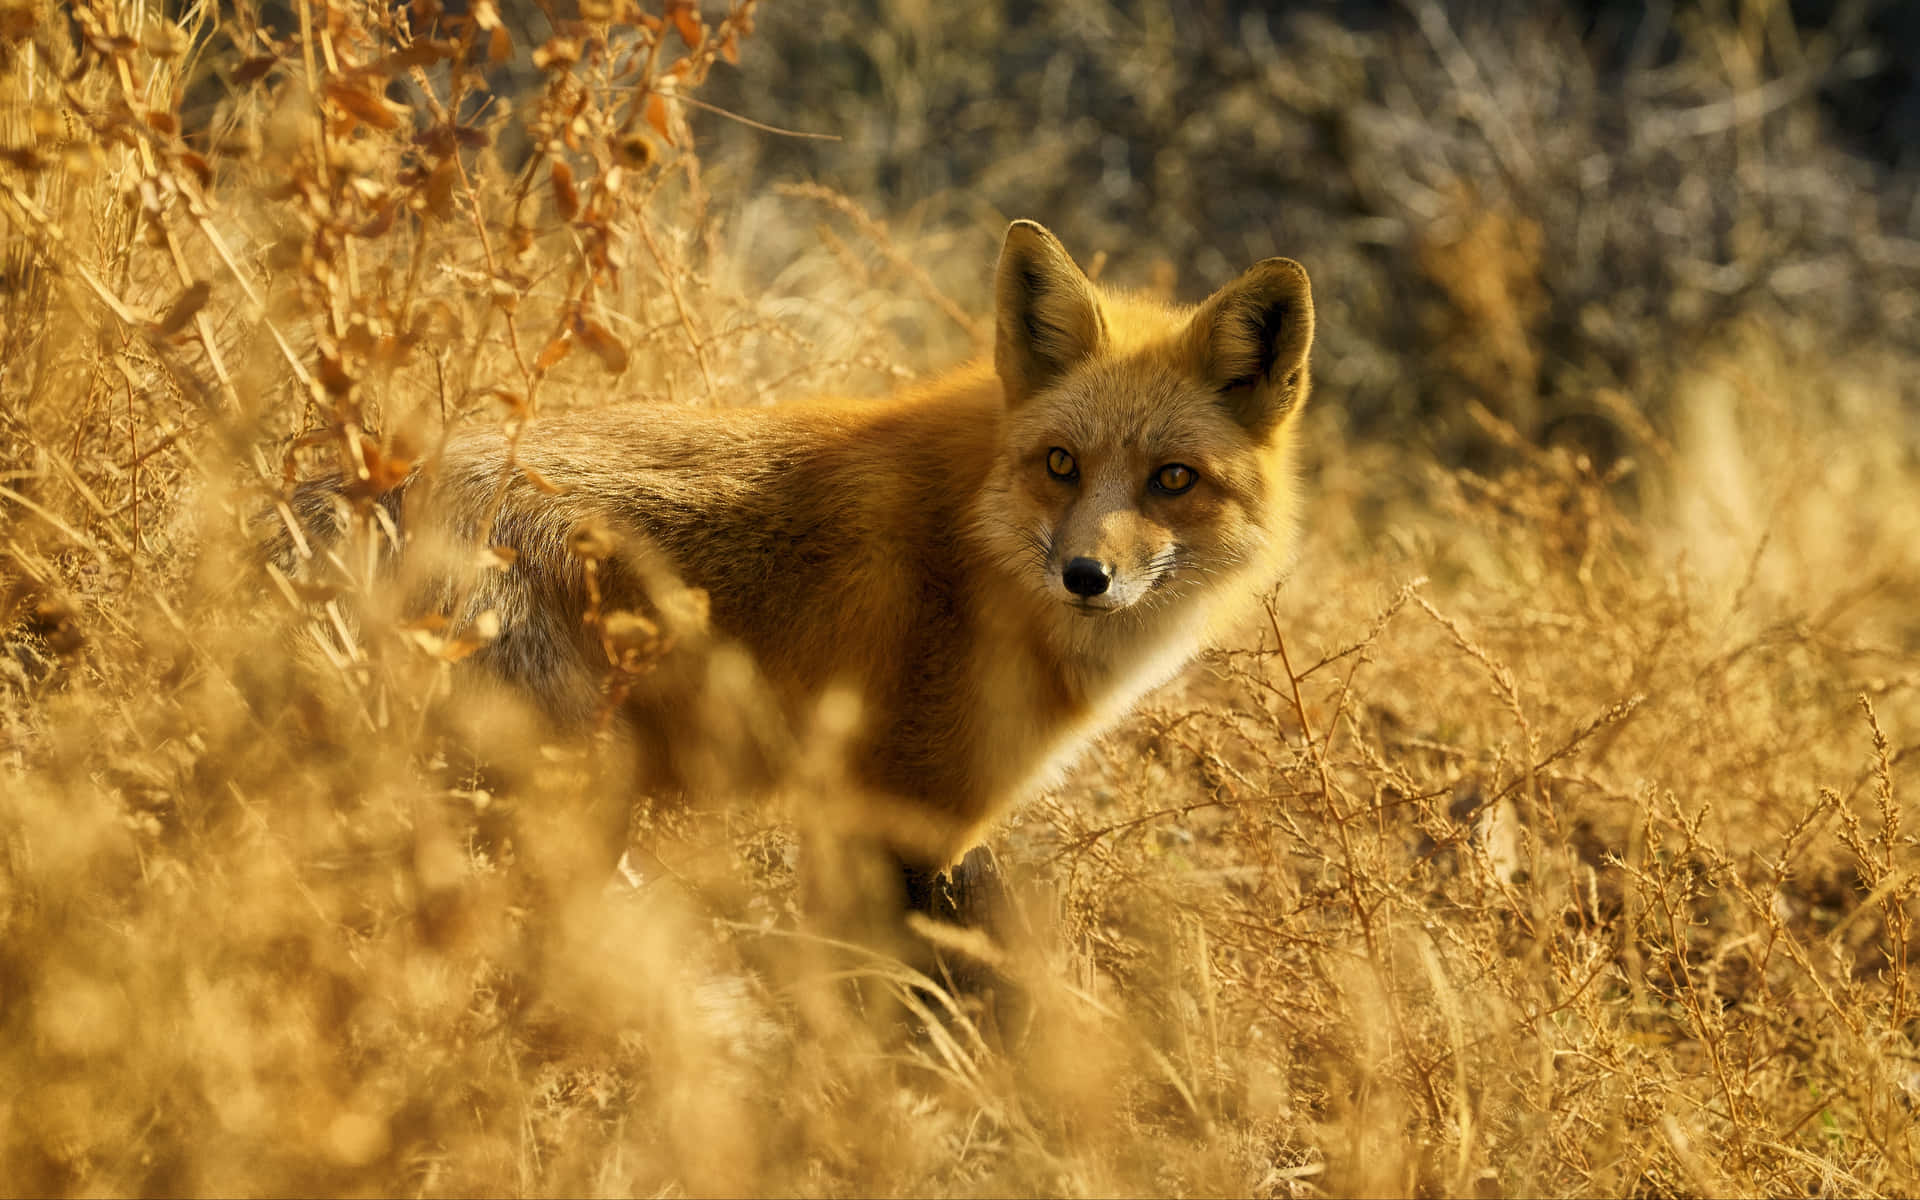 a red fox is standing in a field of dry grass